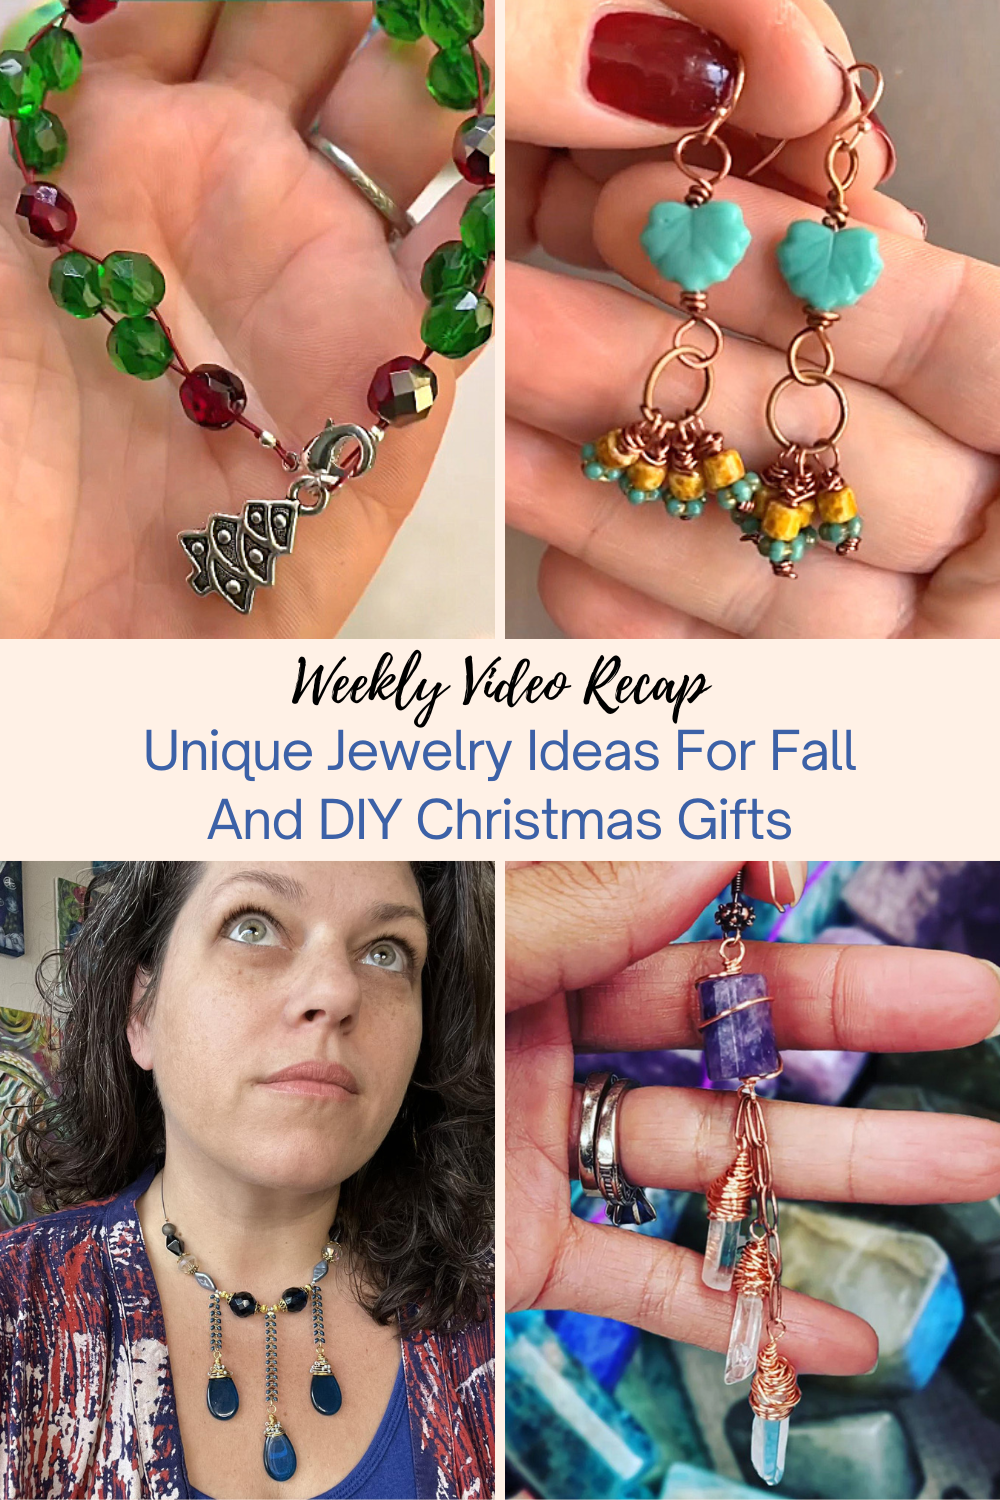 Unique Jewelry Ideas For Fall And DIY Christmas Gifts Collage